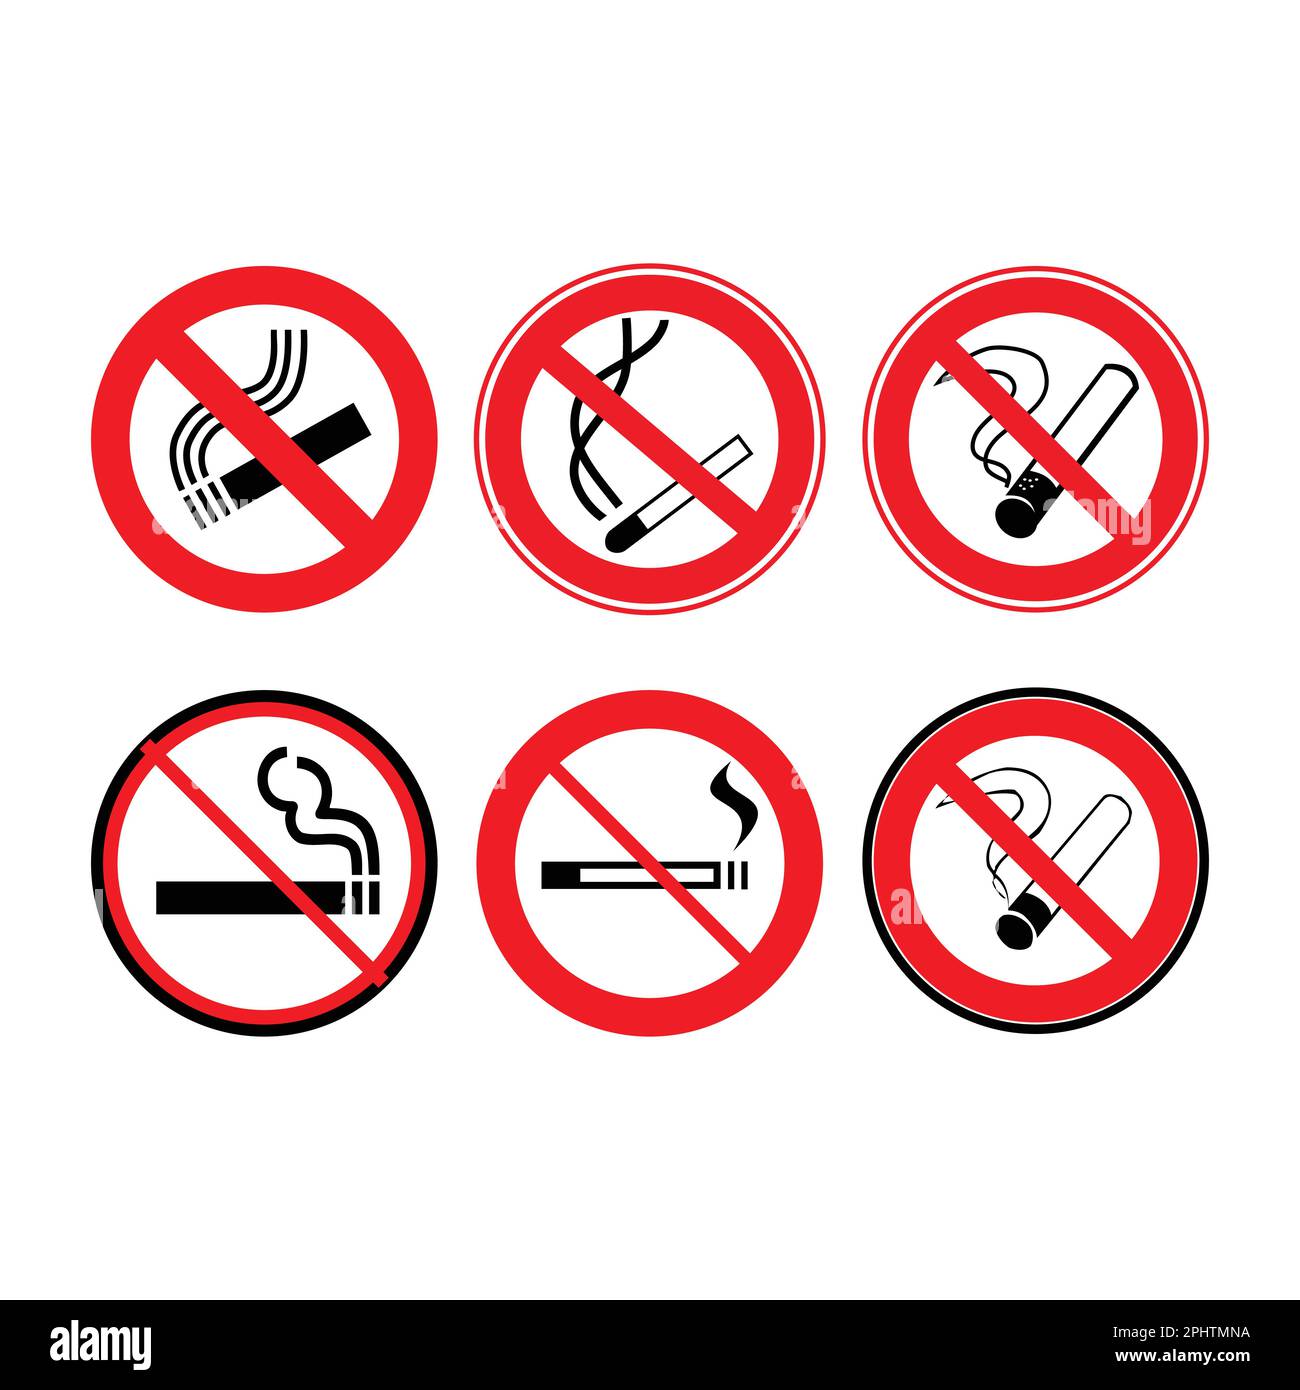 No smoking sign set on white background. Vector illustration. Stock Vector